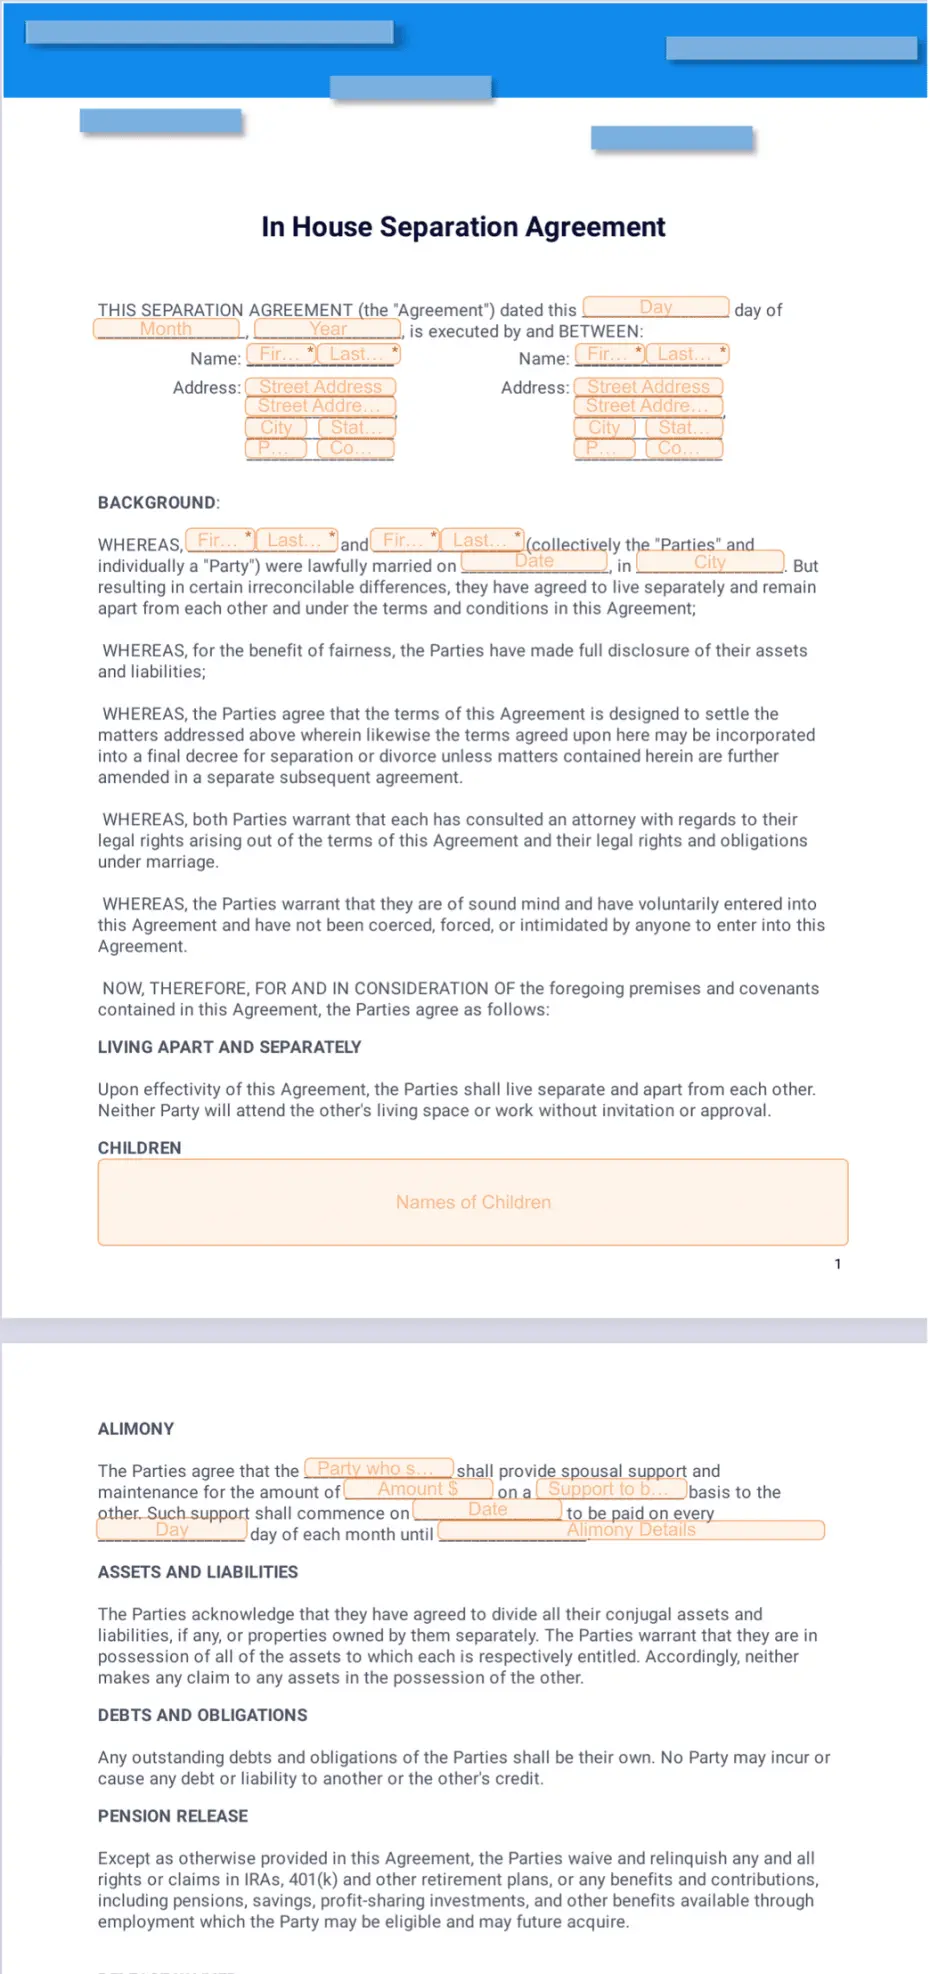 In House Separation Agreement Template